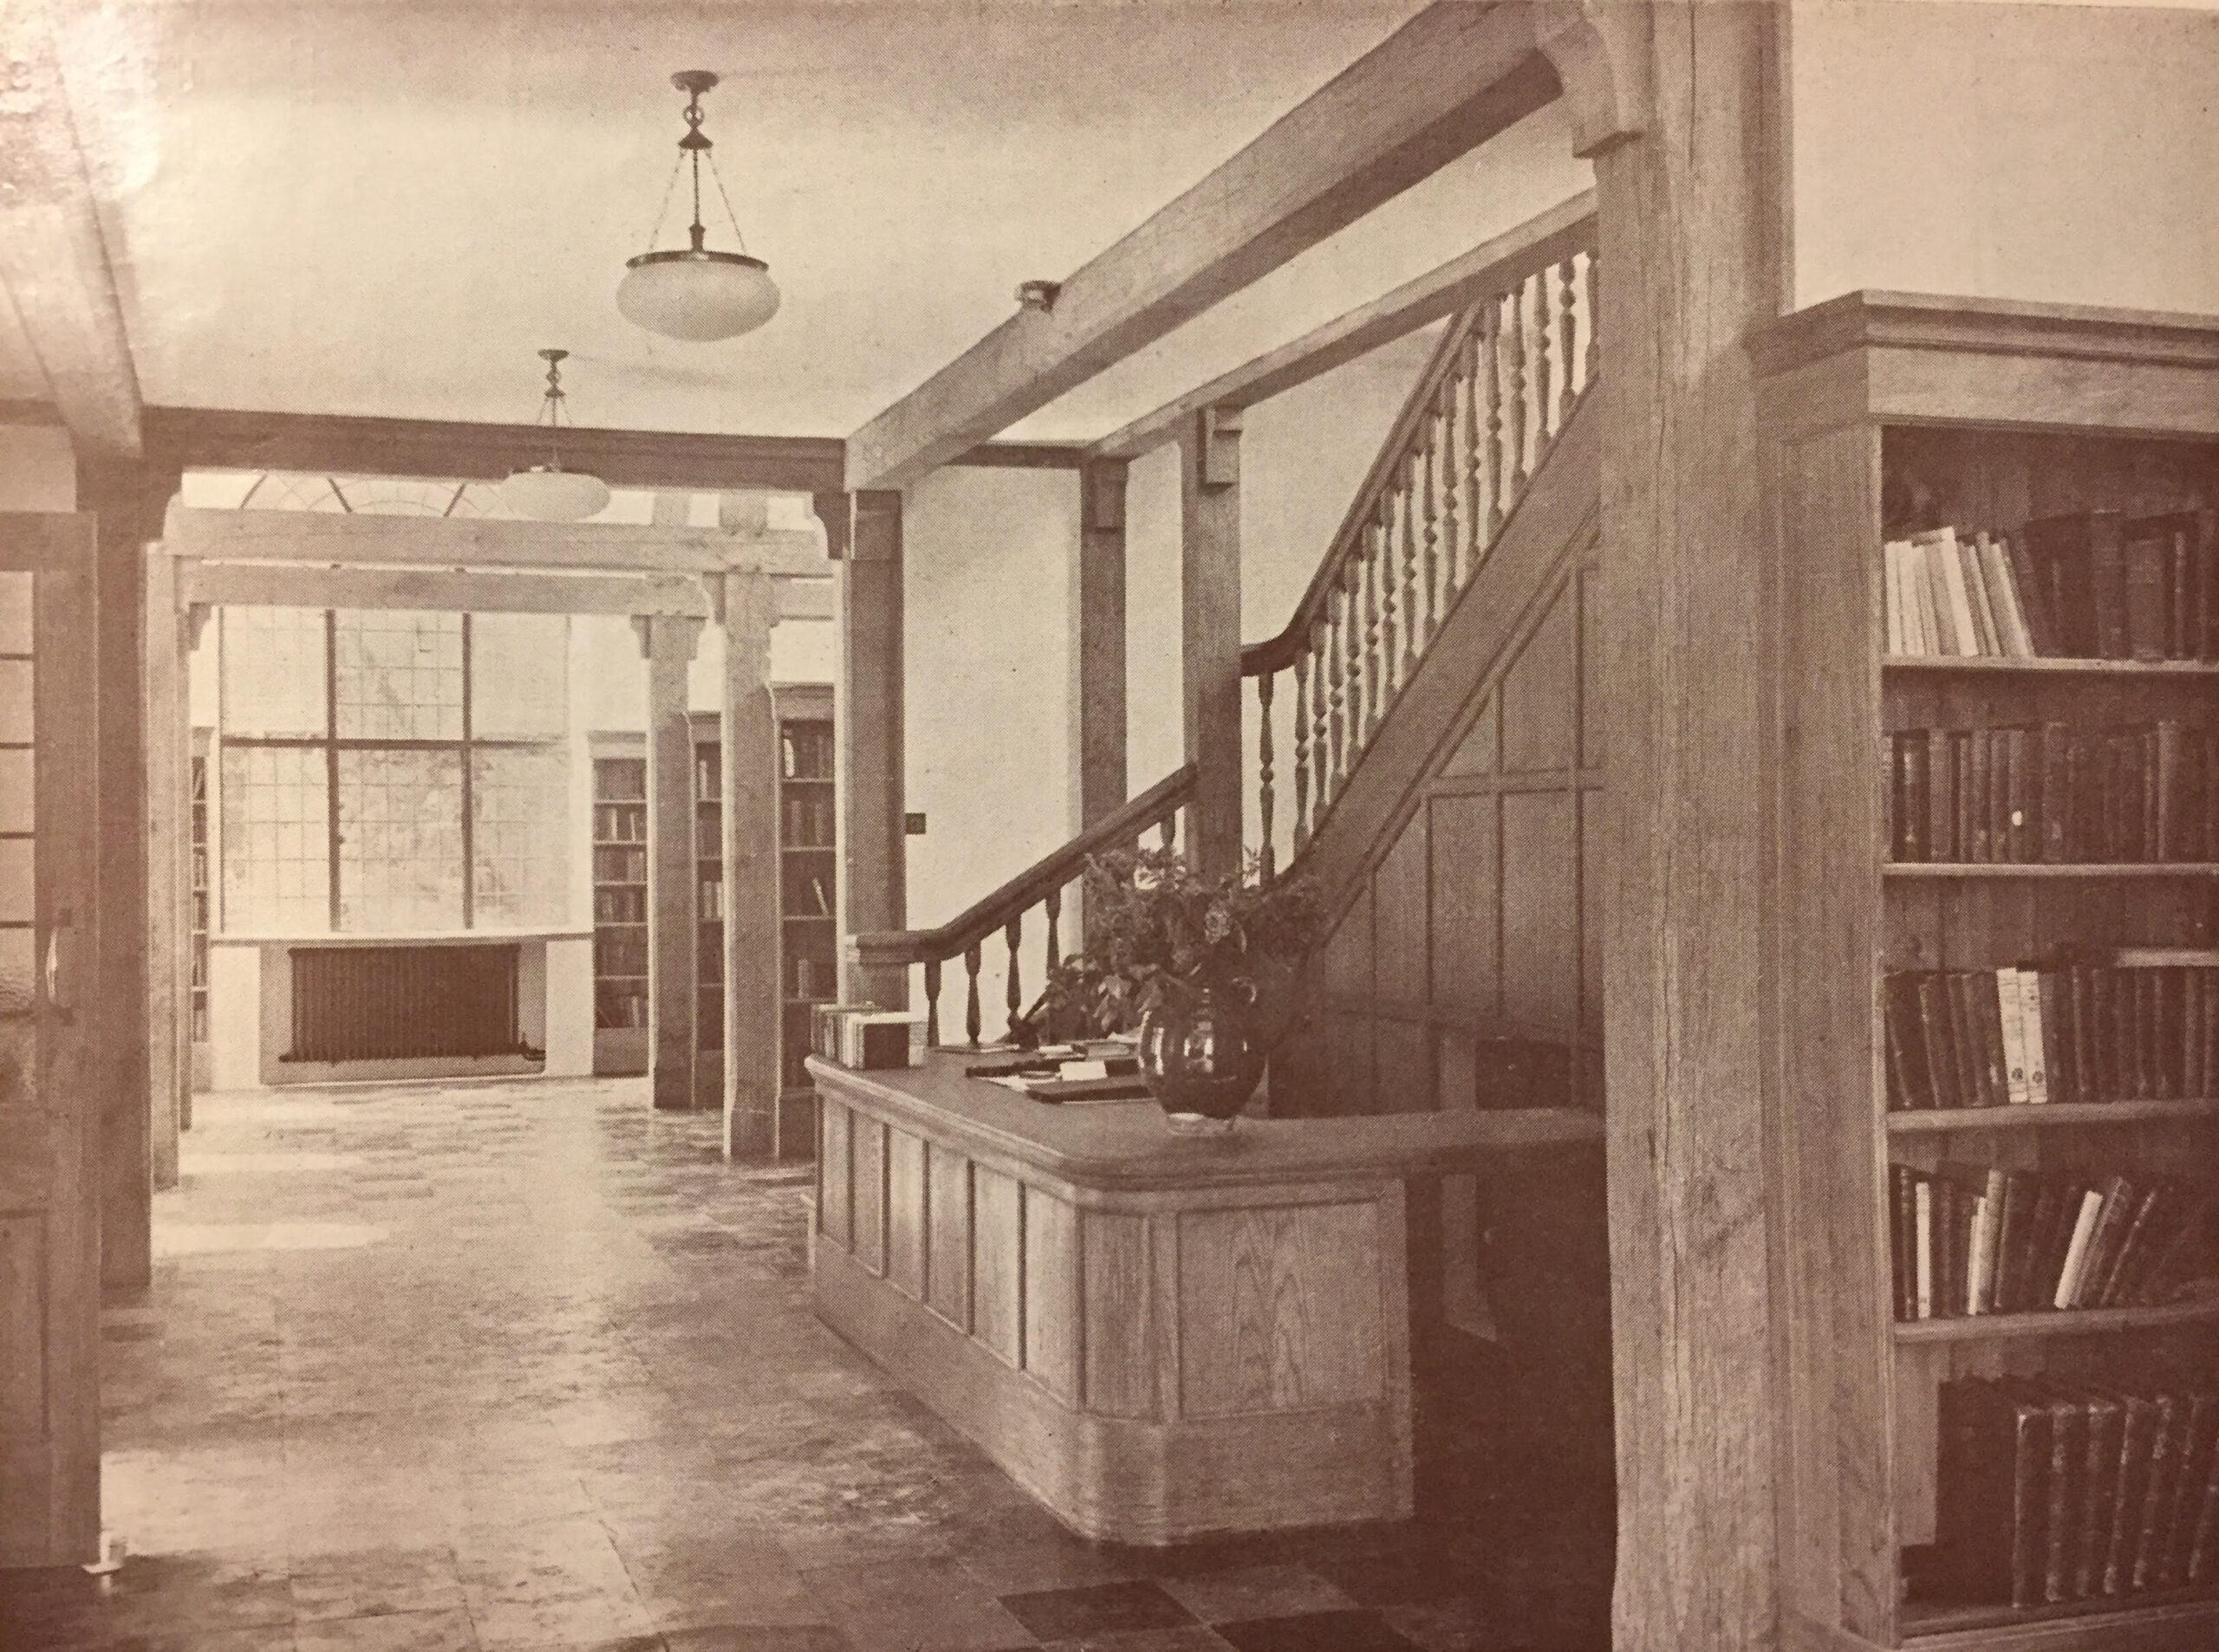 Interior of JR Memorial Library. Reception desk with wooden fixtures and furnishings in the Arts and Crafts tradition.